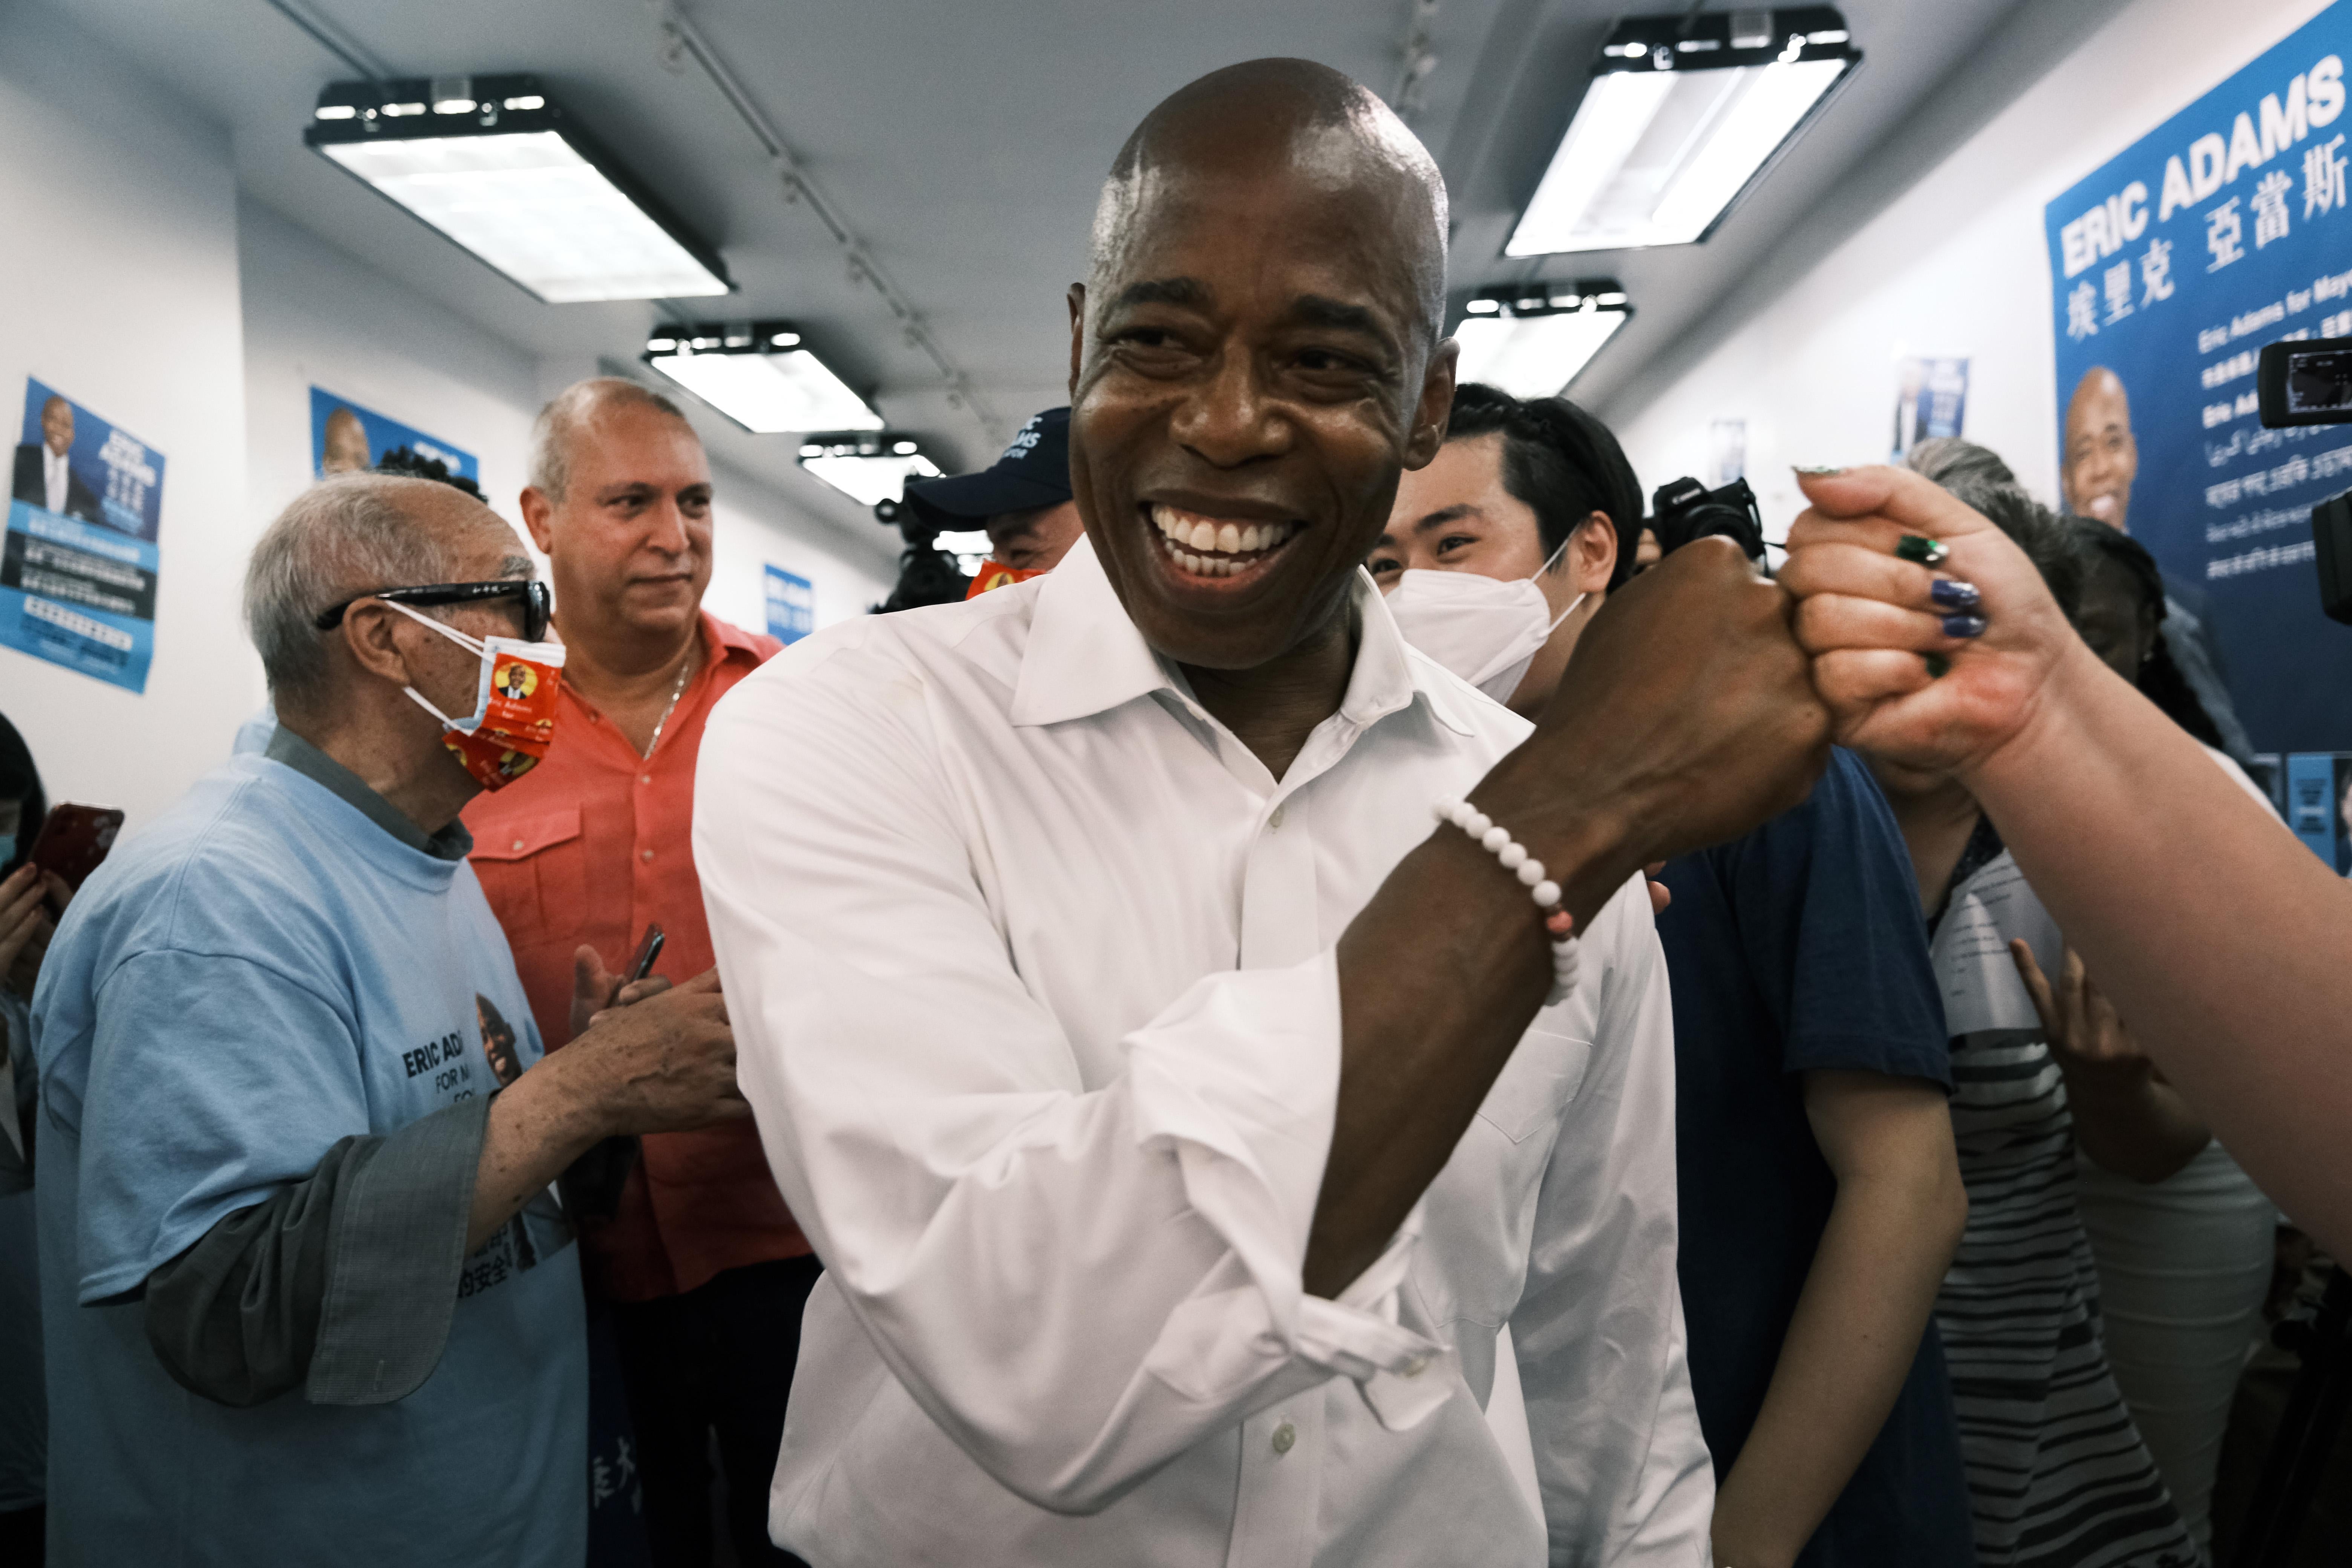 Eric Adams fist-bumps a supporter while standing and smiling in a room.